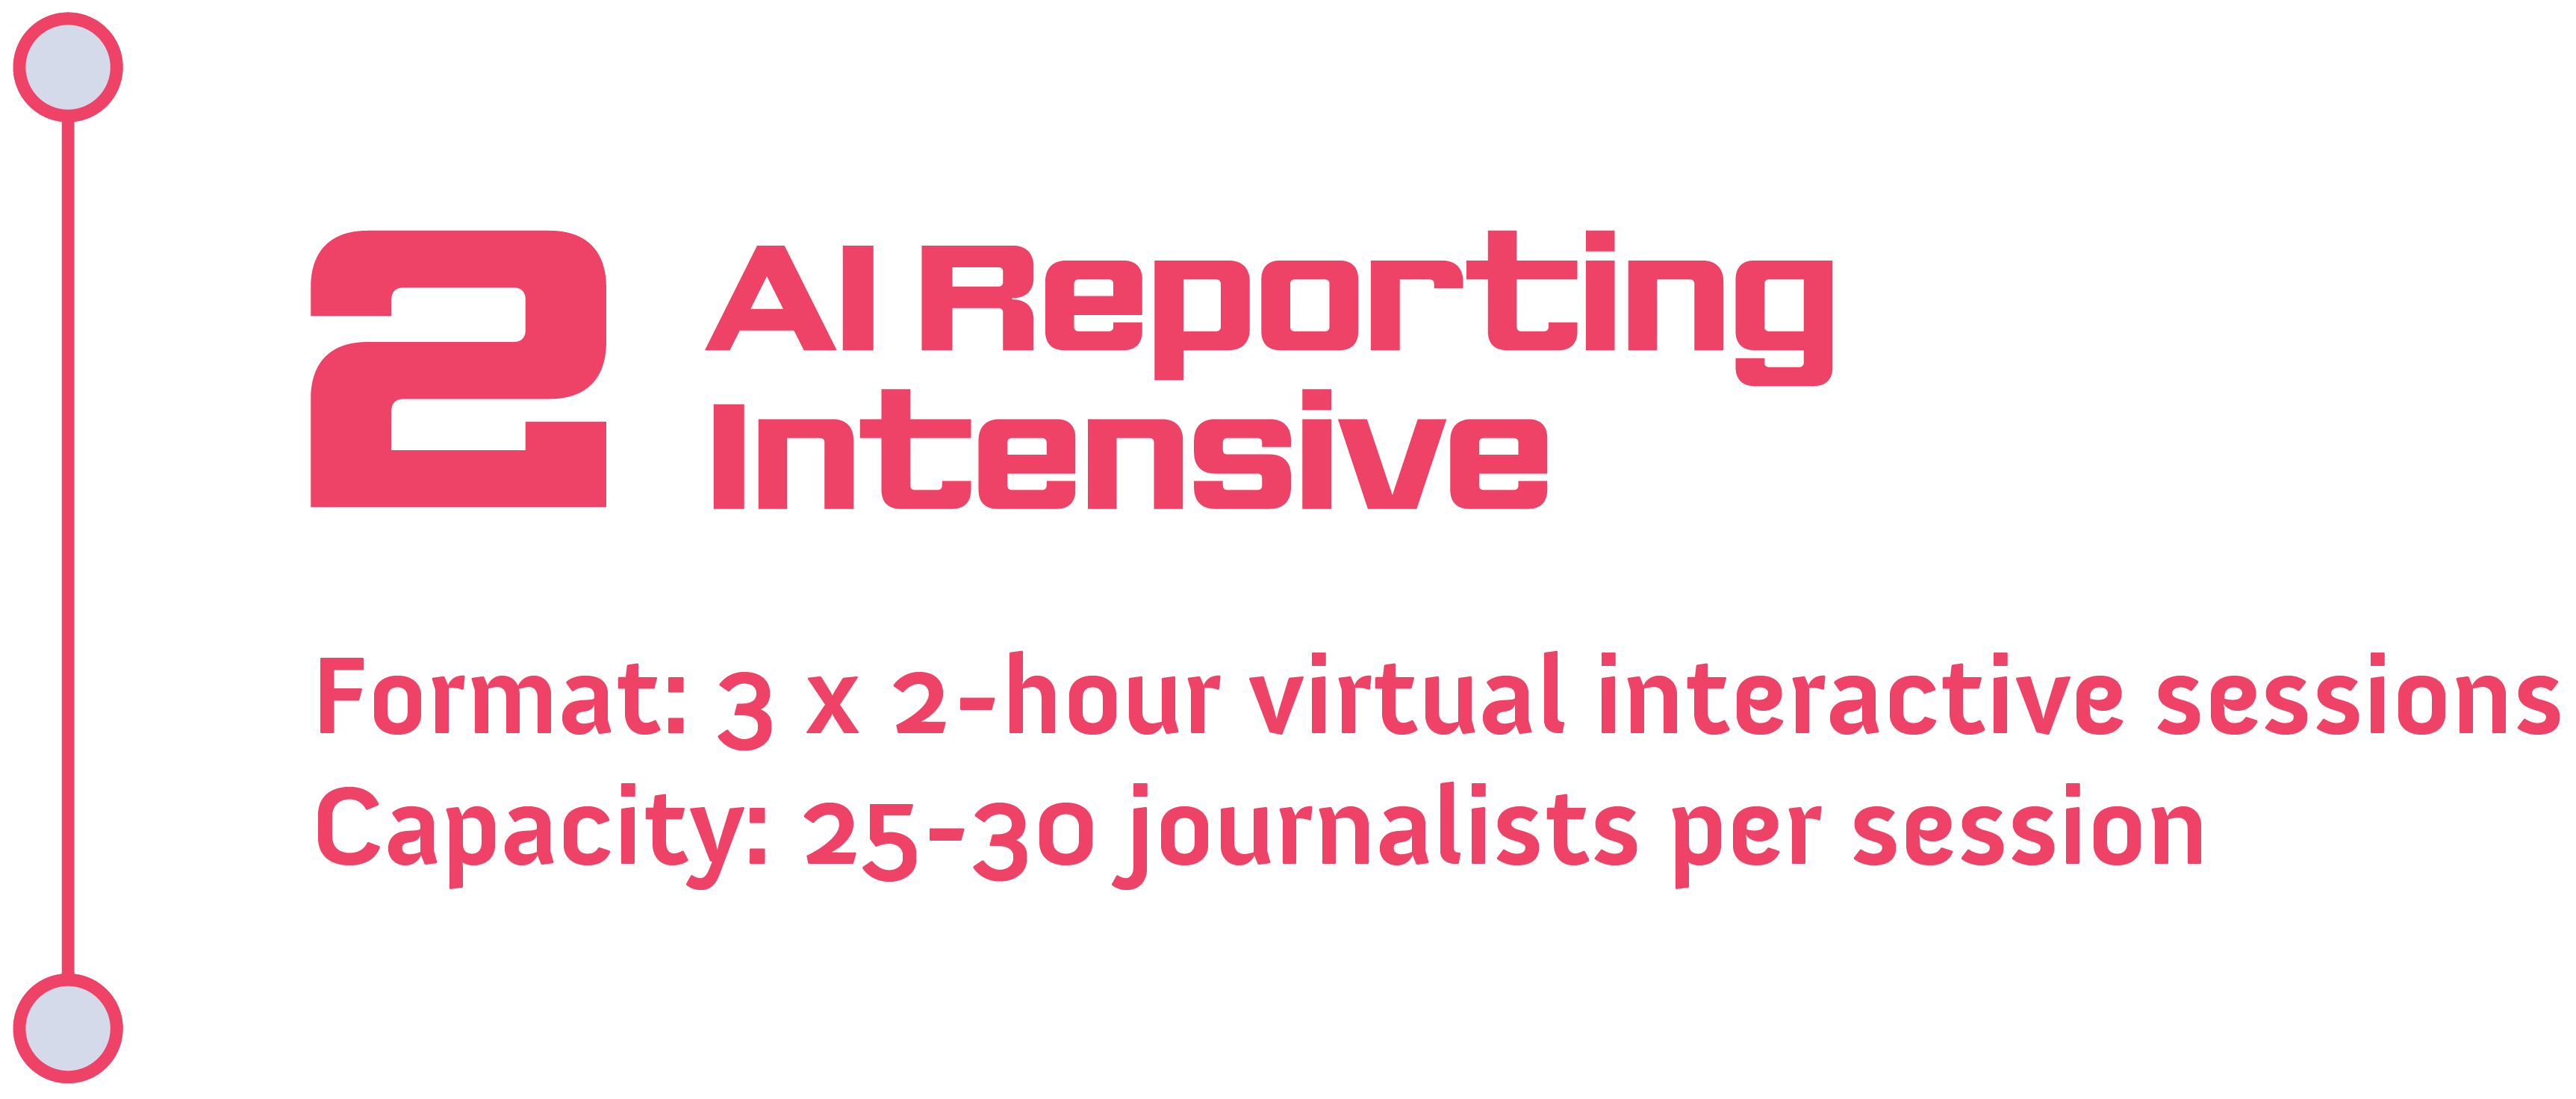 Track 2: AI Reporting Intensive<br />
Format: 3x2-hour virtual interactive sessions<br />
Capacity: 25-30 journalists per session